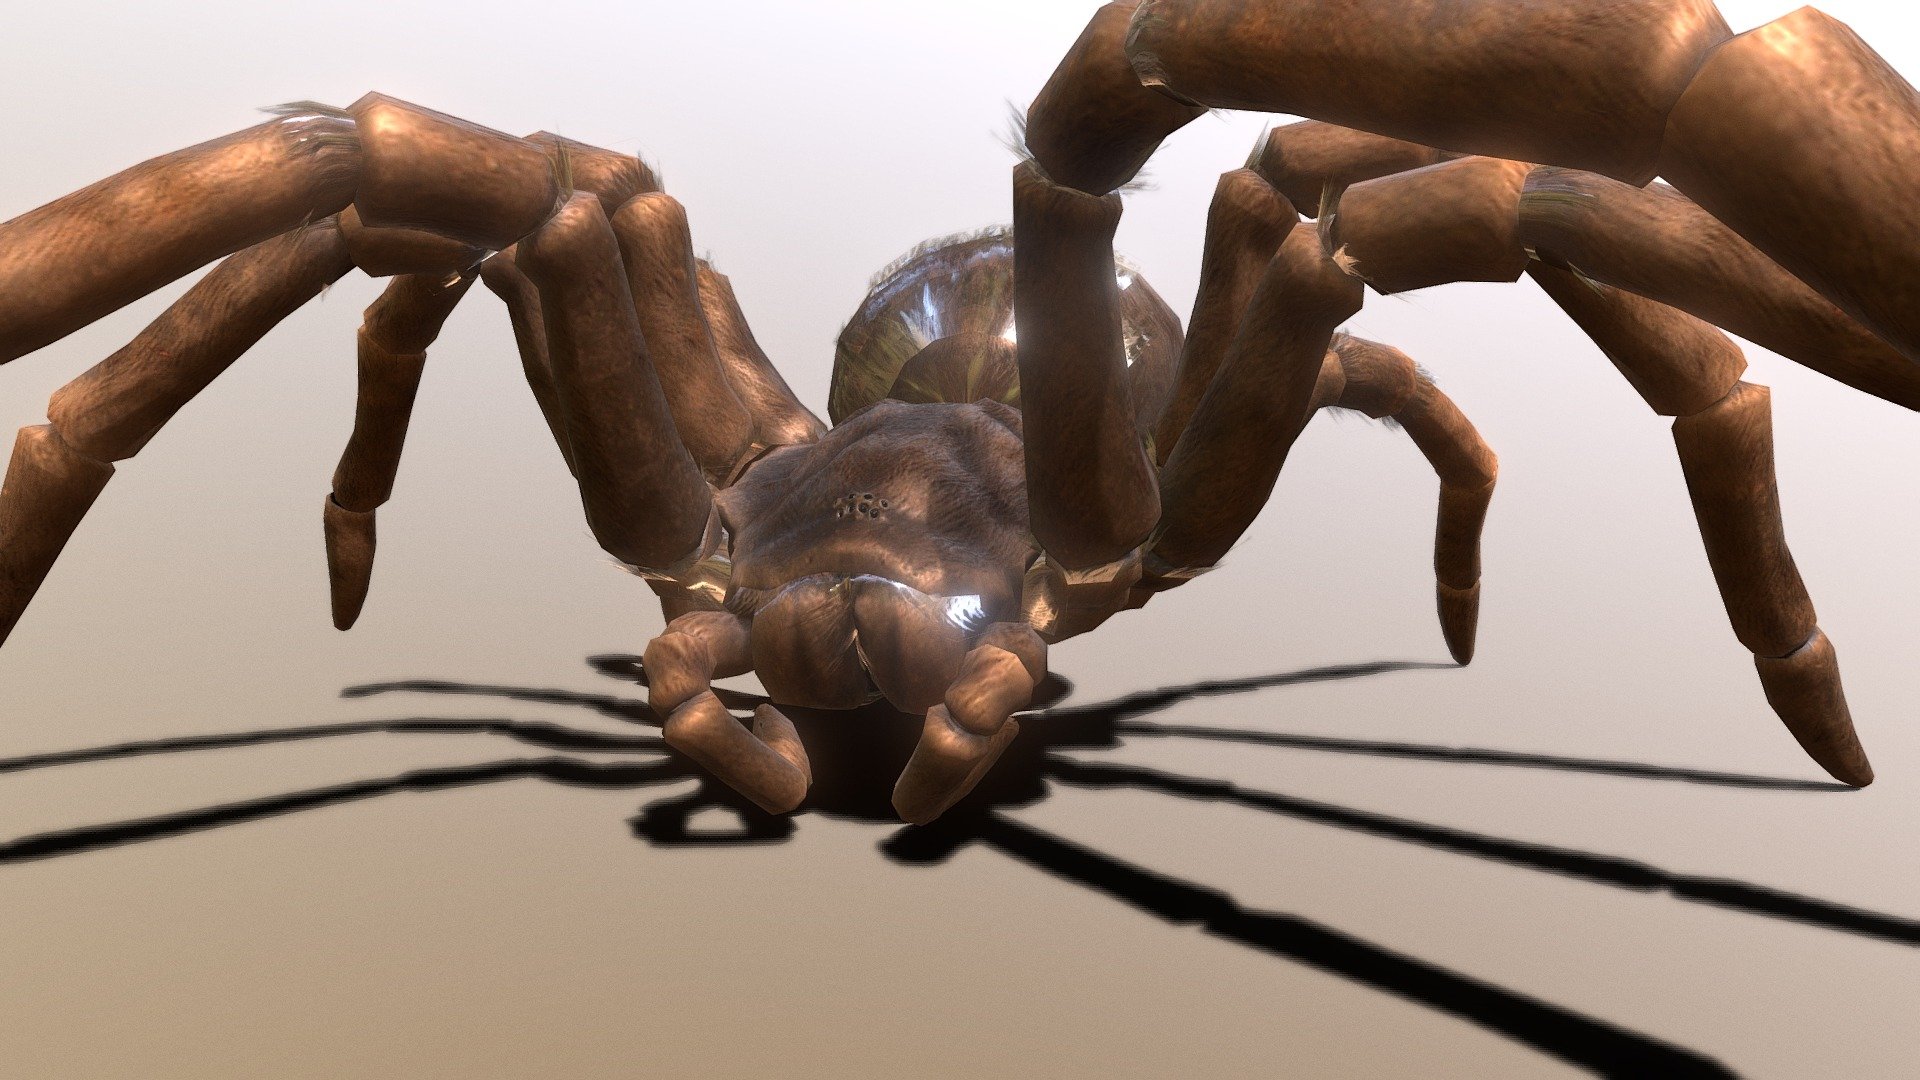 The most biggest tarantula on earth so this spider is eats small birds and large mice so they can be good pets because they just like to crawl on your hand but their venom is mild so you don't have to worry about their venom they won't kill a single person.

Different species of spiders

Red Knee Tarantula: https://sketchfab.com/3d-models/mexican-red-knee-tarantula-1d28067d95b44e63a494f52cb9d0ea68

Black Widow: https://sketchfab.com/3d-models/black-widow-spider-4d67969a3243460ab2a536a60e4c4de5 - Goliath Birdeater Tarantula - 3D model by Aiden Vang (@vang807) 3d model